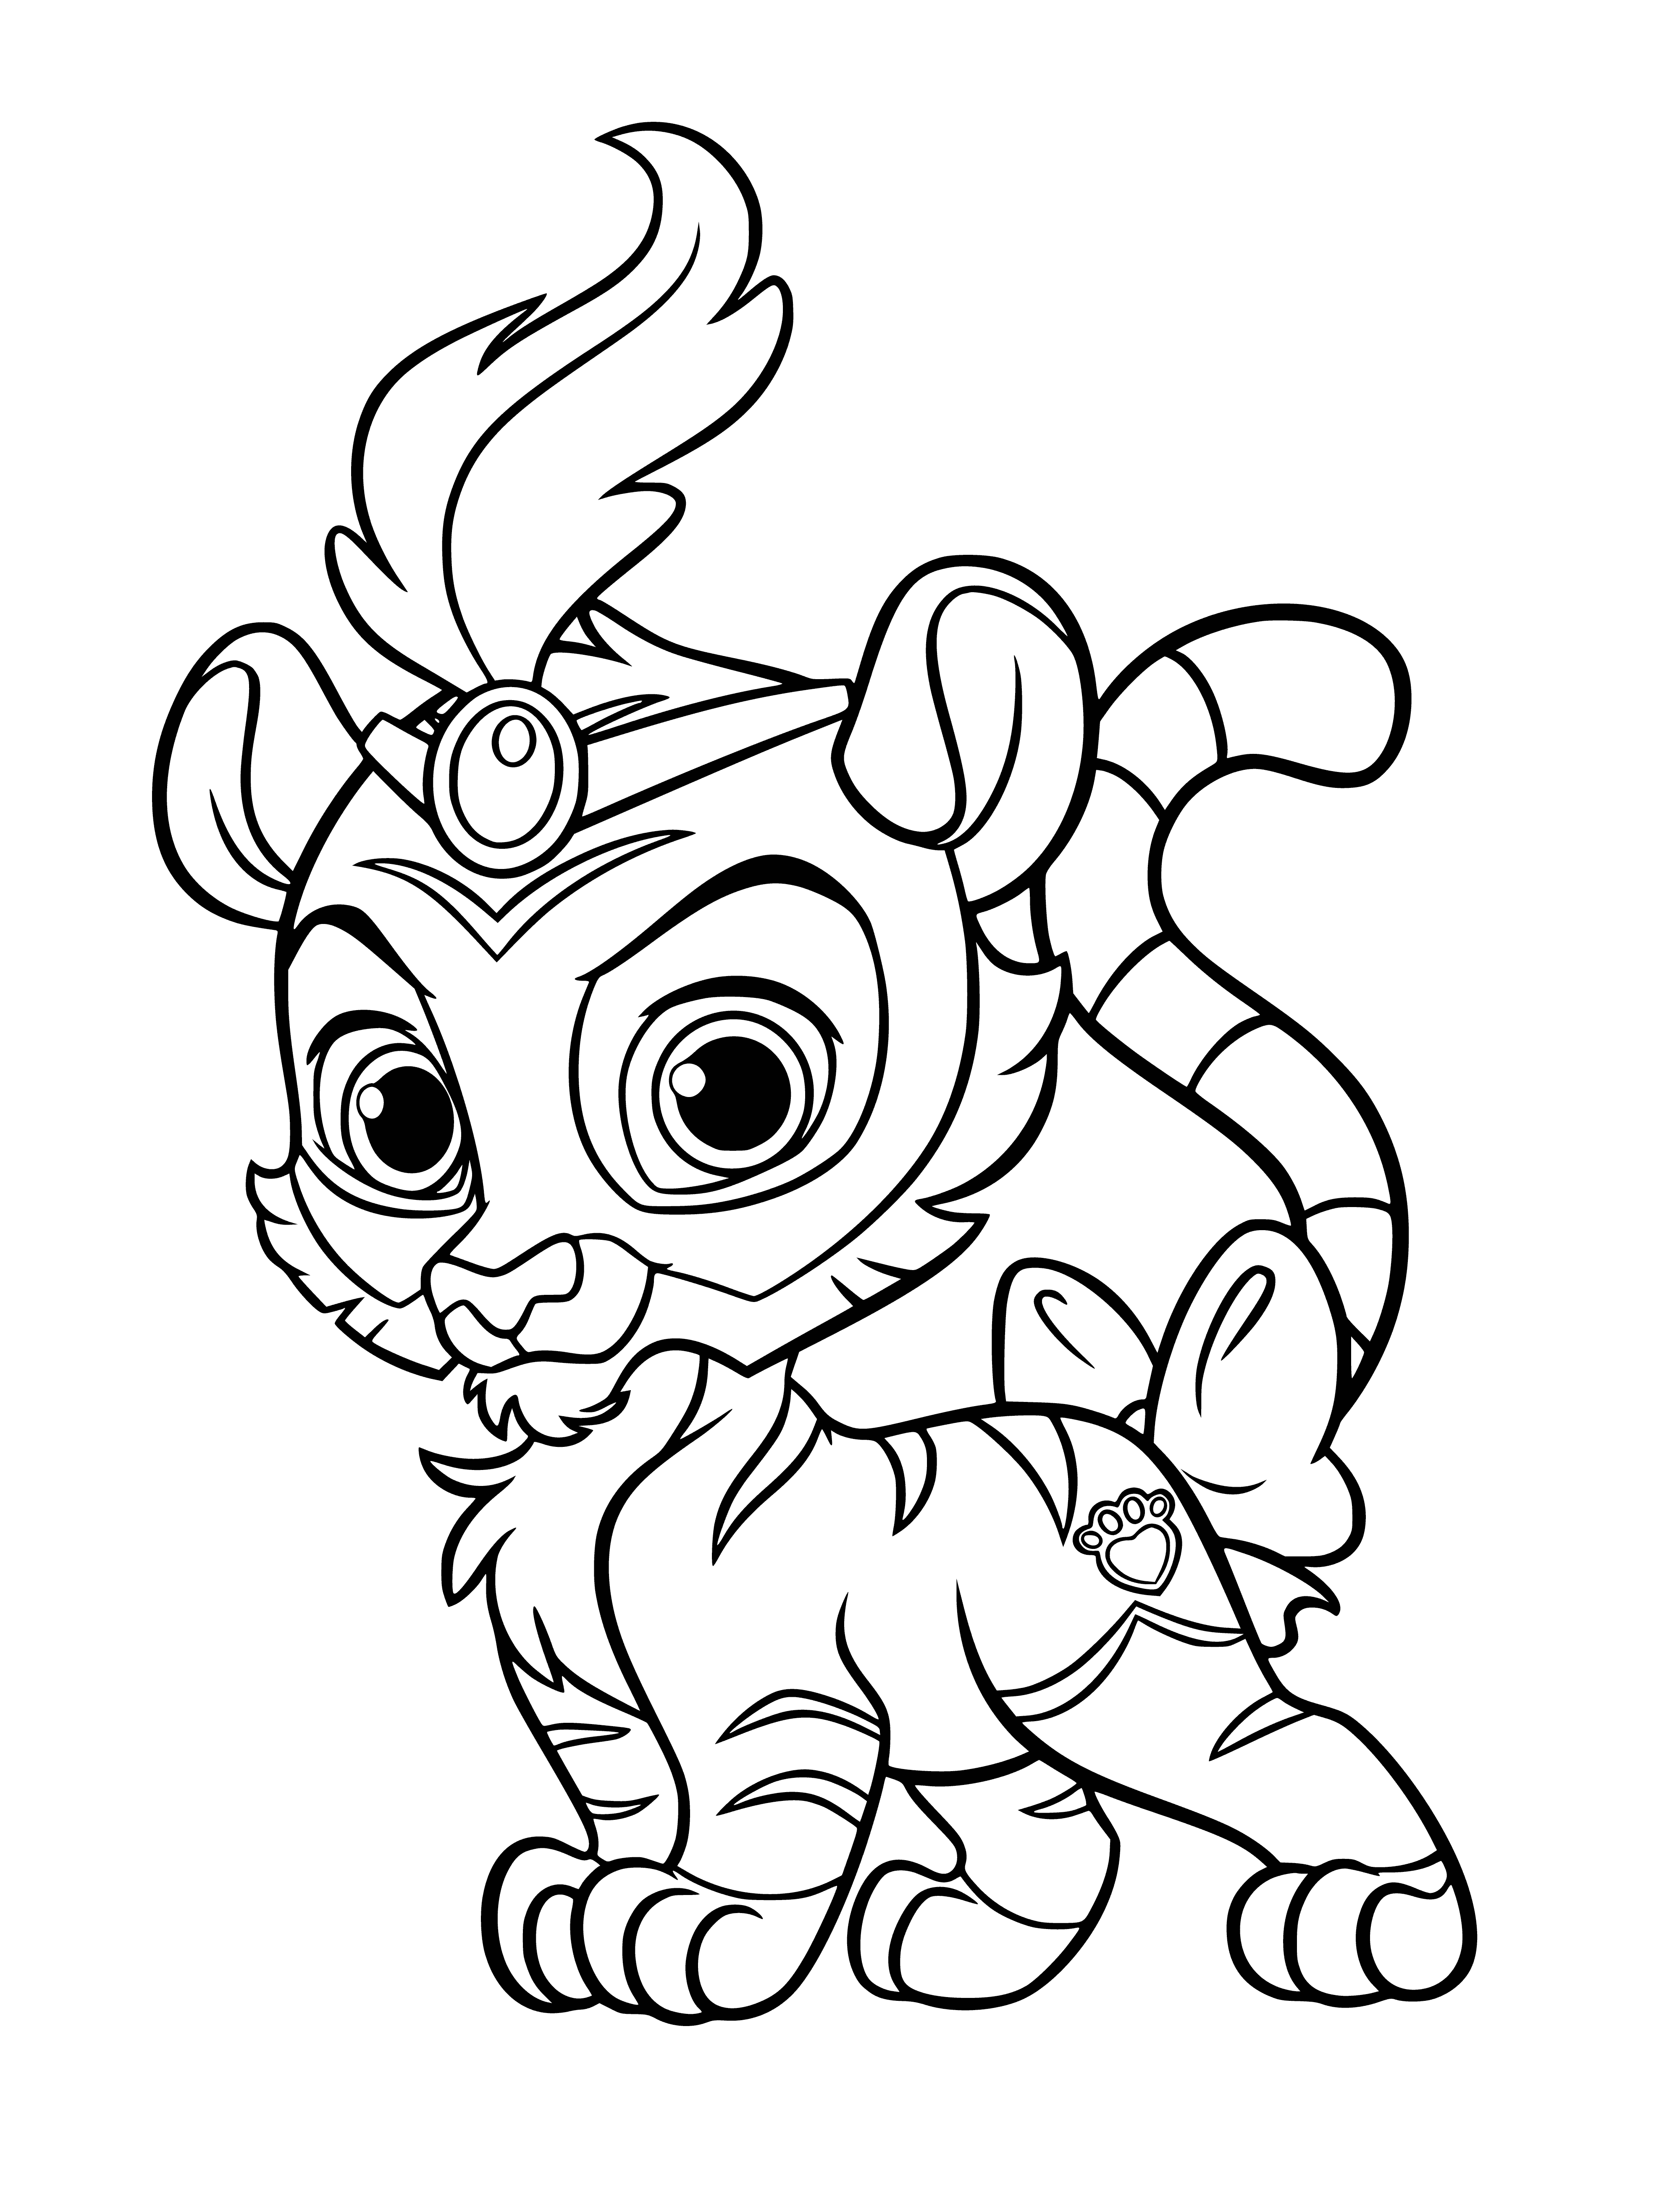 coloring page: Tiger cub Sultan has a light brown coat & pet Jasmine is white with black spots. They look full of energy & sit calmly next to each other.